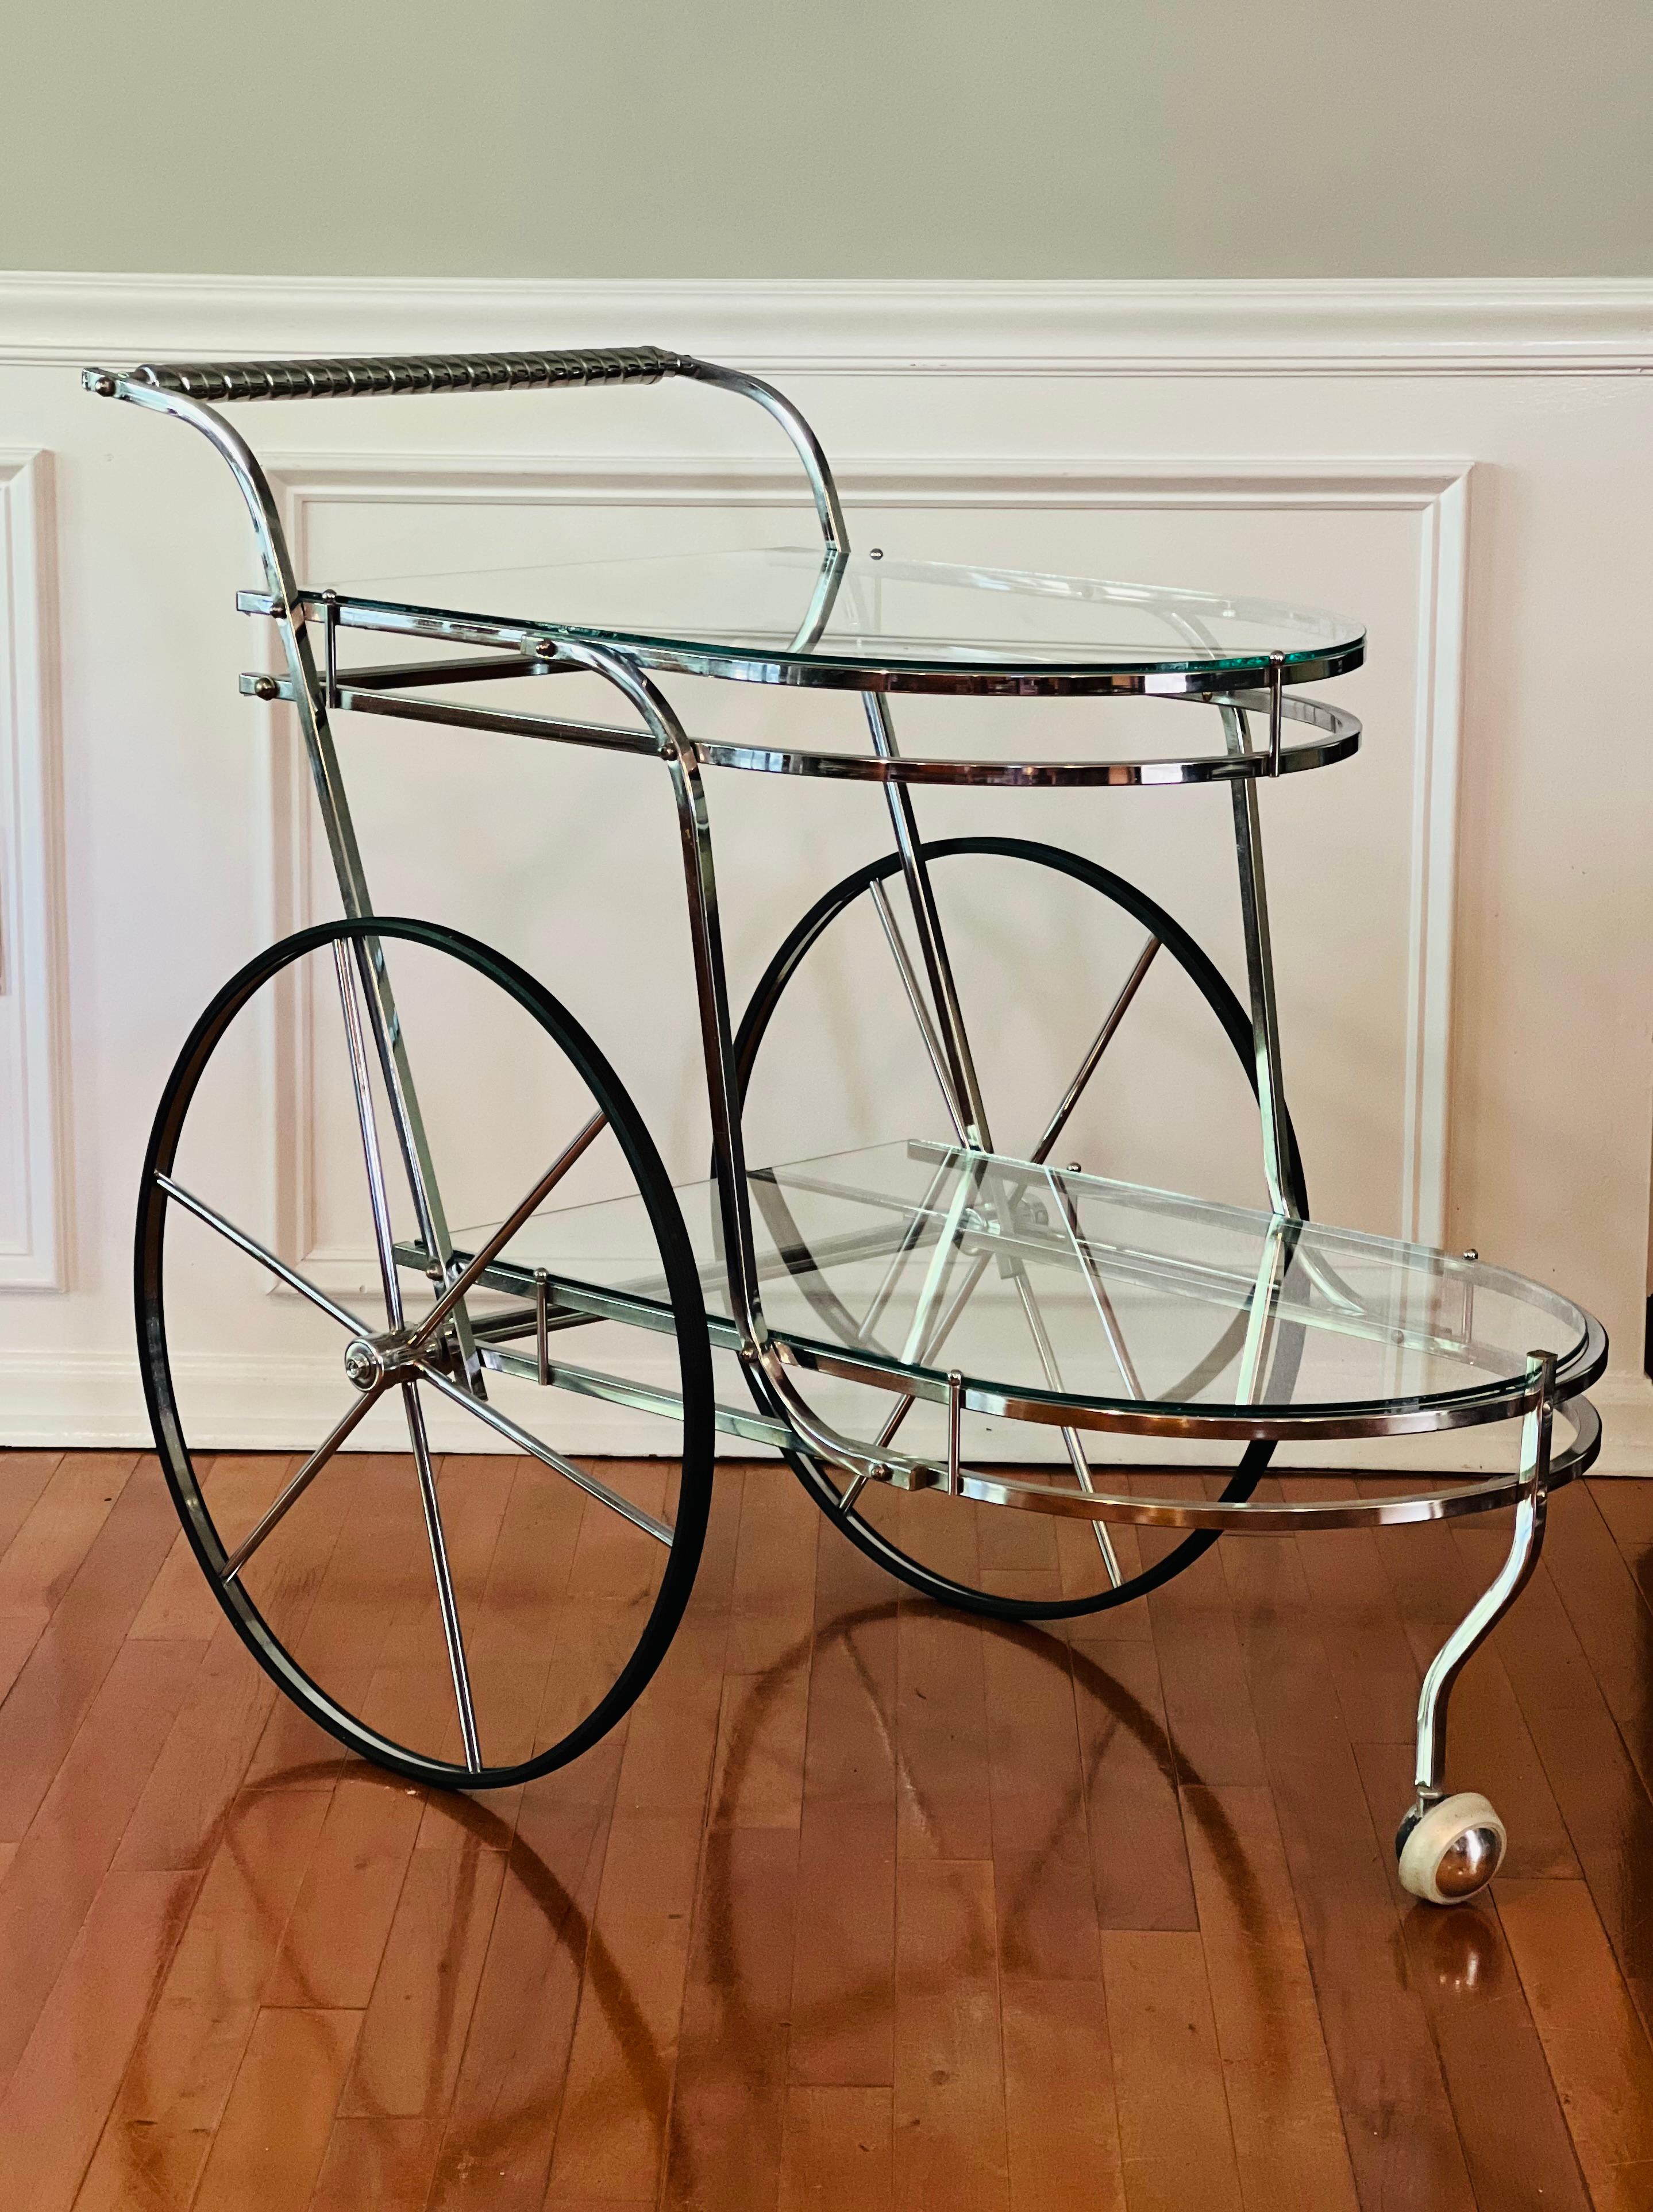 Elegant vintage polished chrome and glass two-tier Italian bar cart. 

Features two large carriage style wheels and one small front swivel one. Rope twist design handle. The chrome is brilliant and in very good condition. Beautiful.